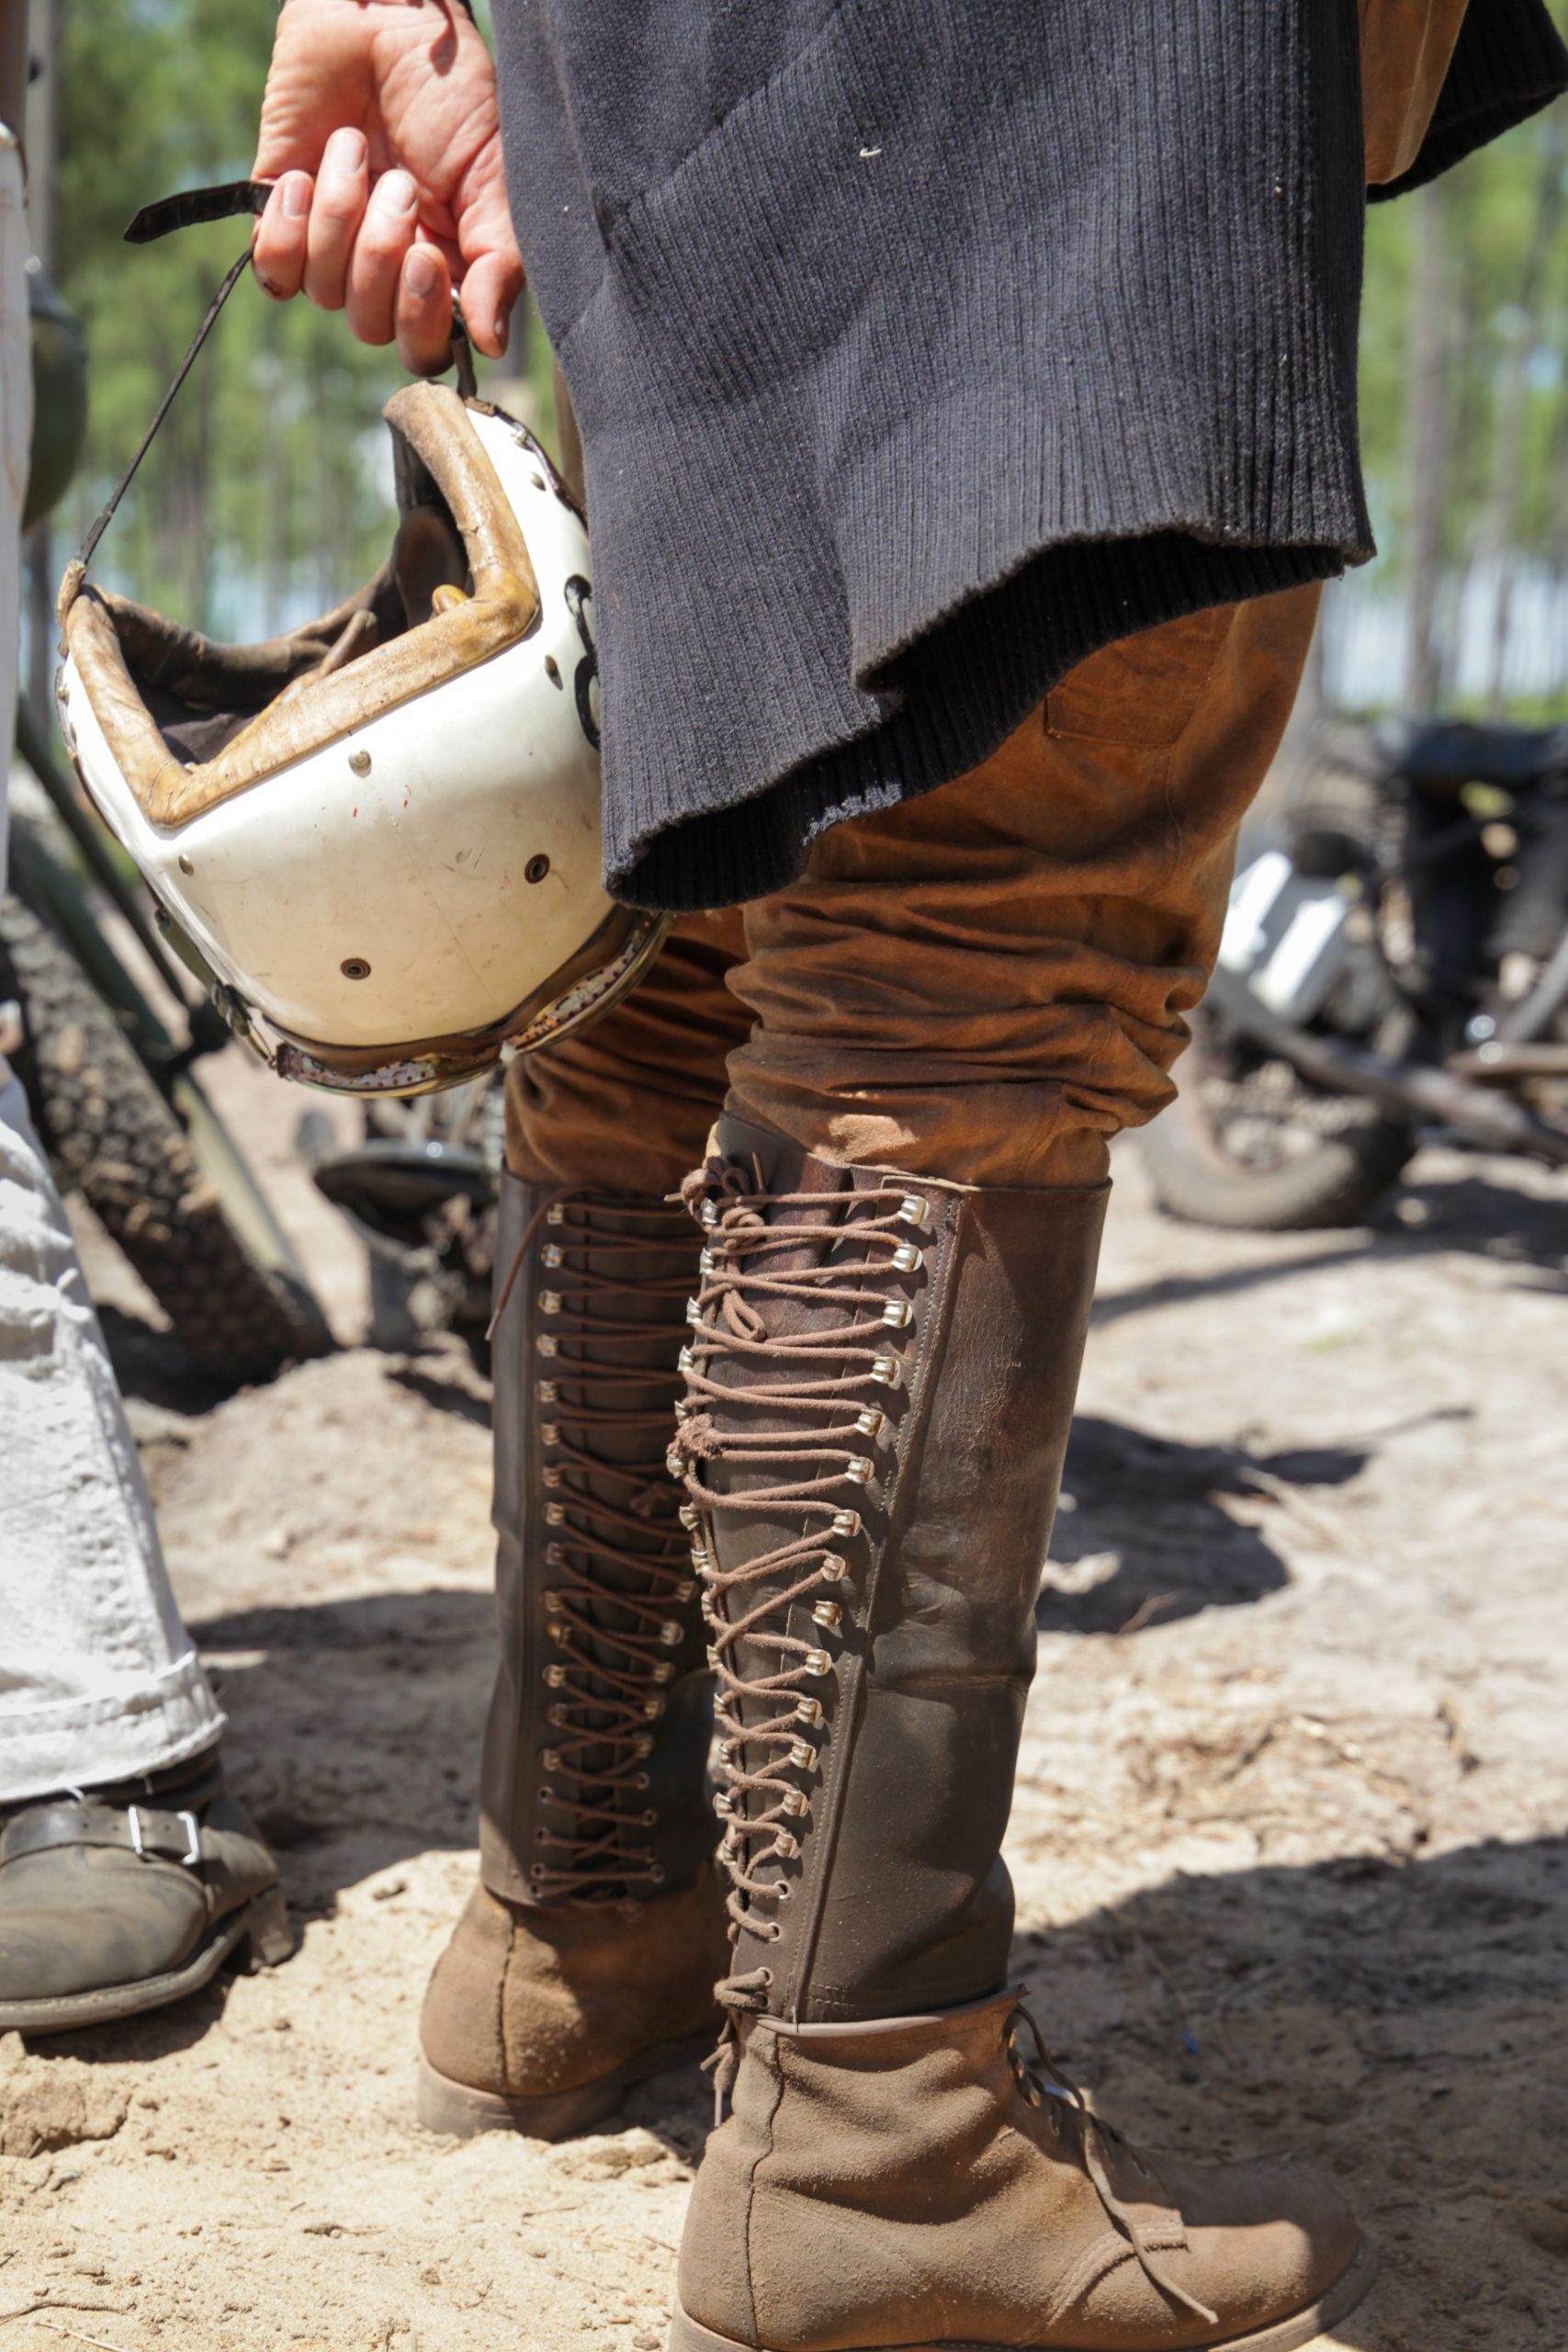 Vintage motorcycle boots